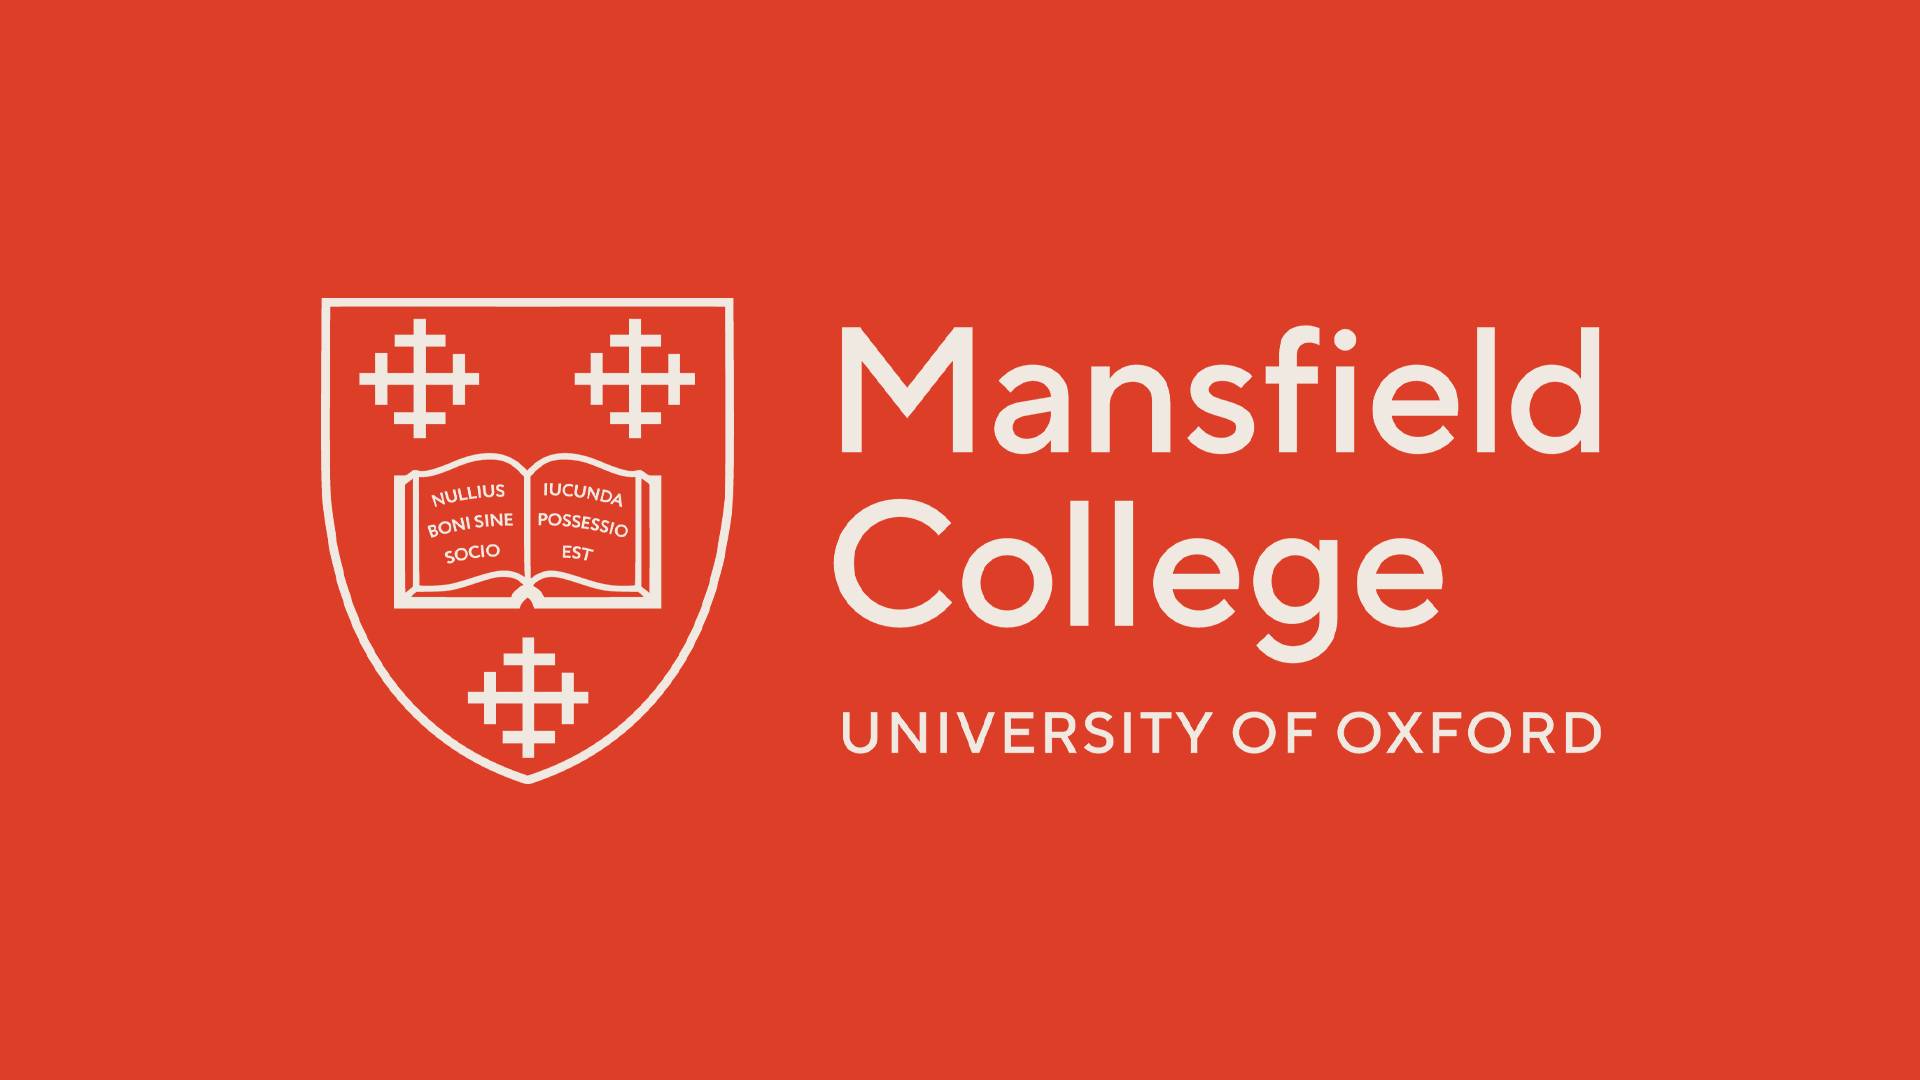 Mansfield College, Oxford redesigned logo on different coloured backgrounds